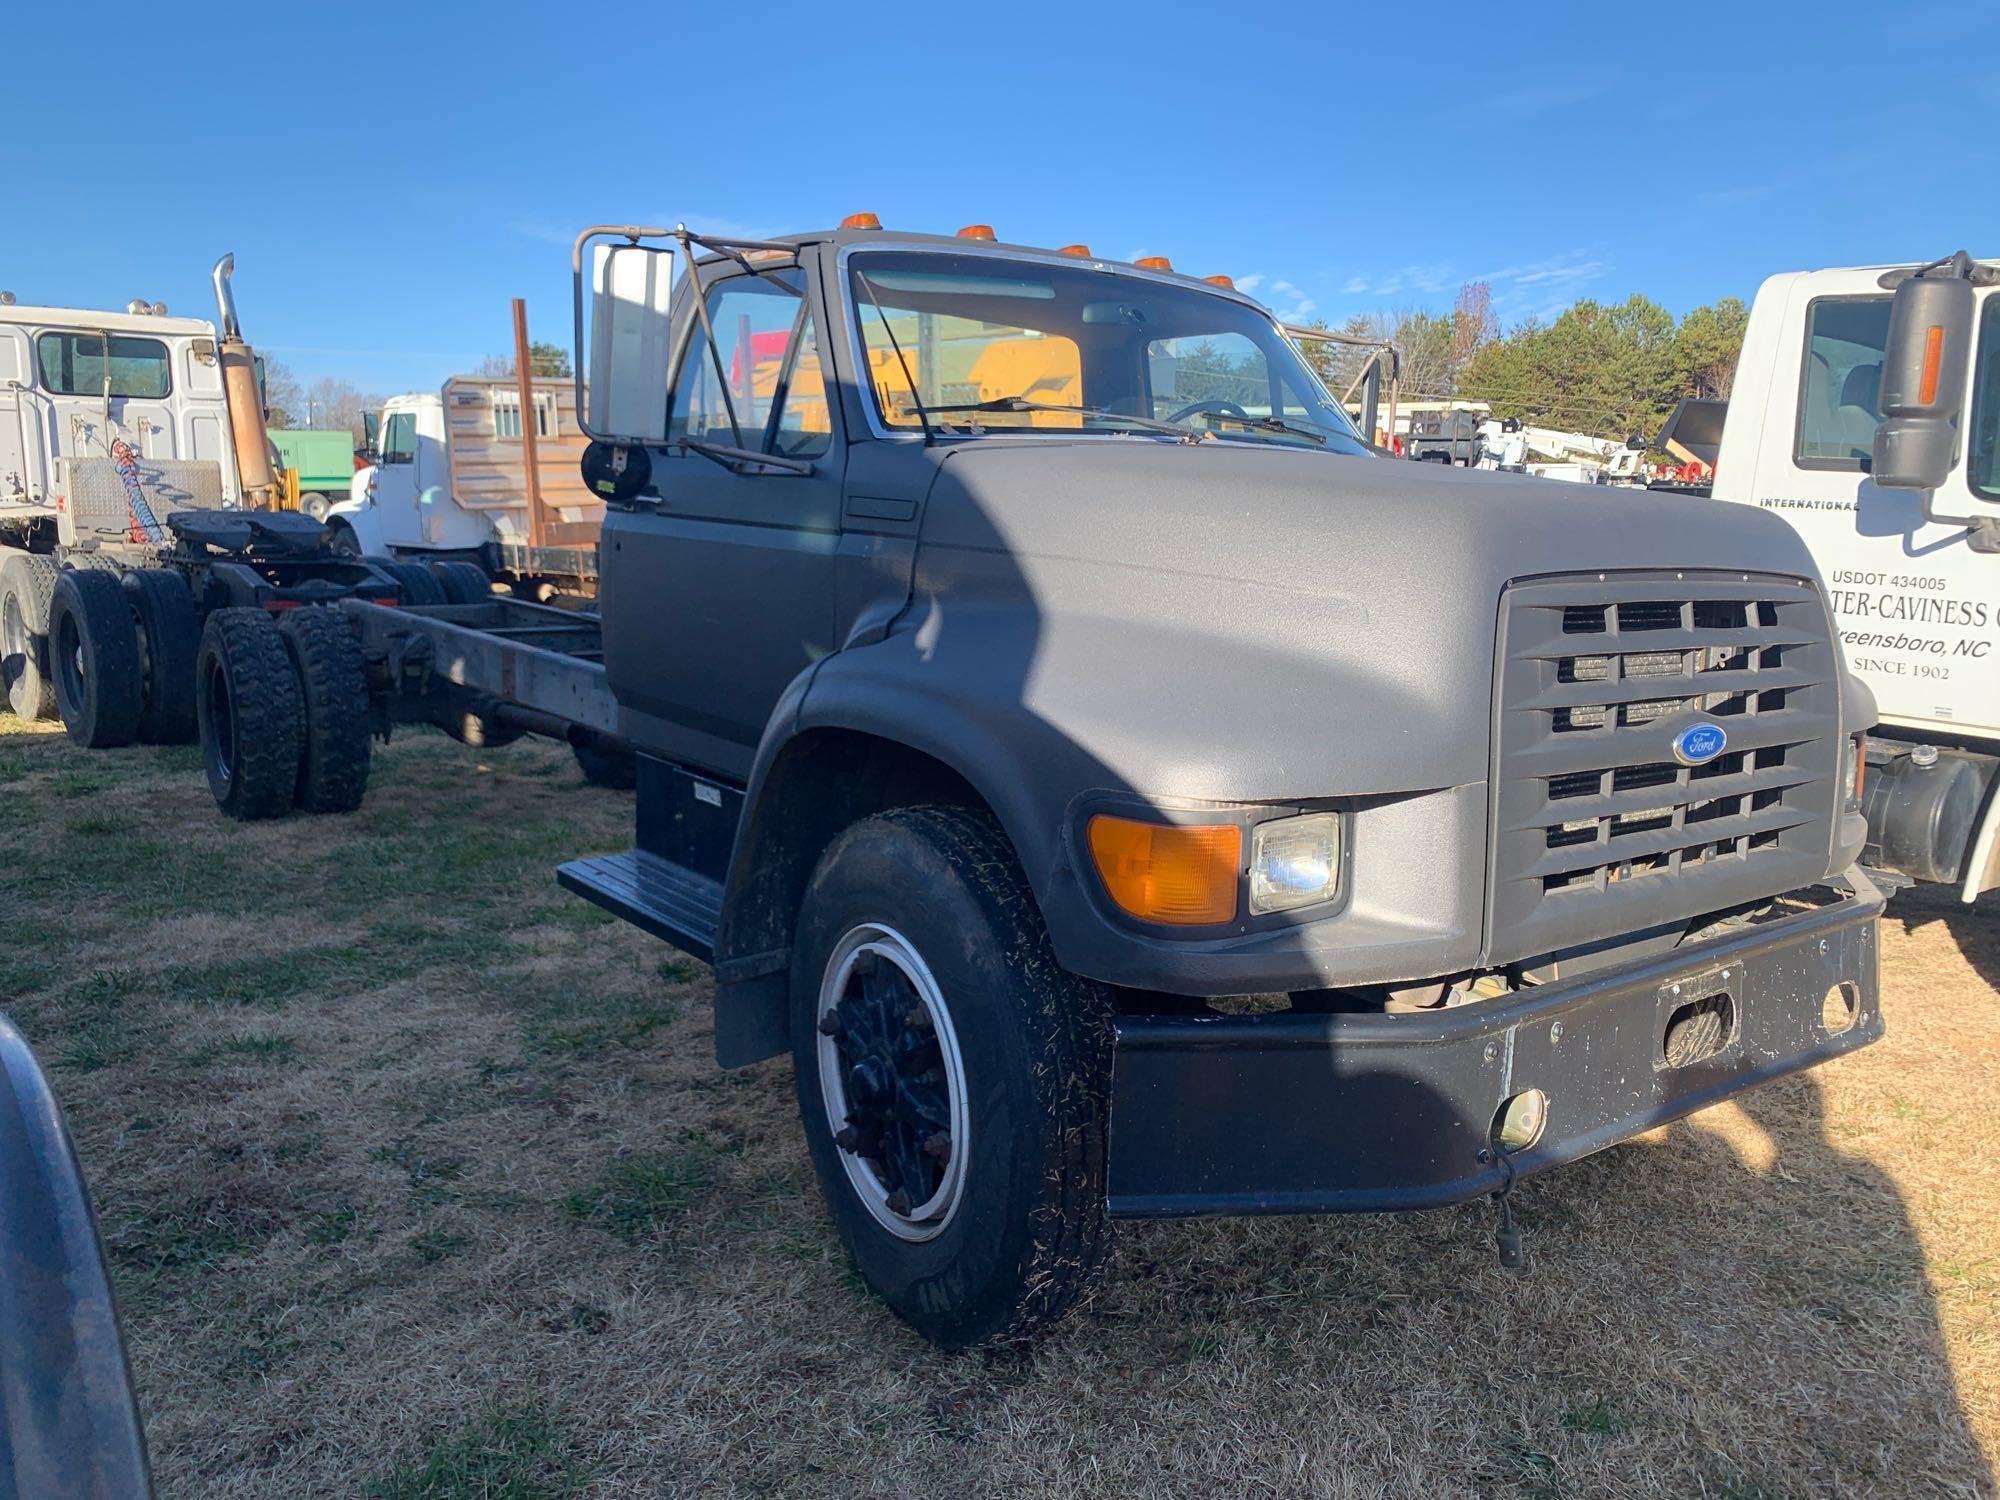 1995 Ford F800 S/A Cab and Chassis Truck